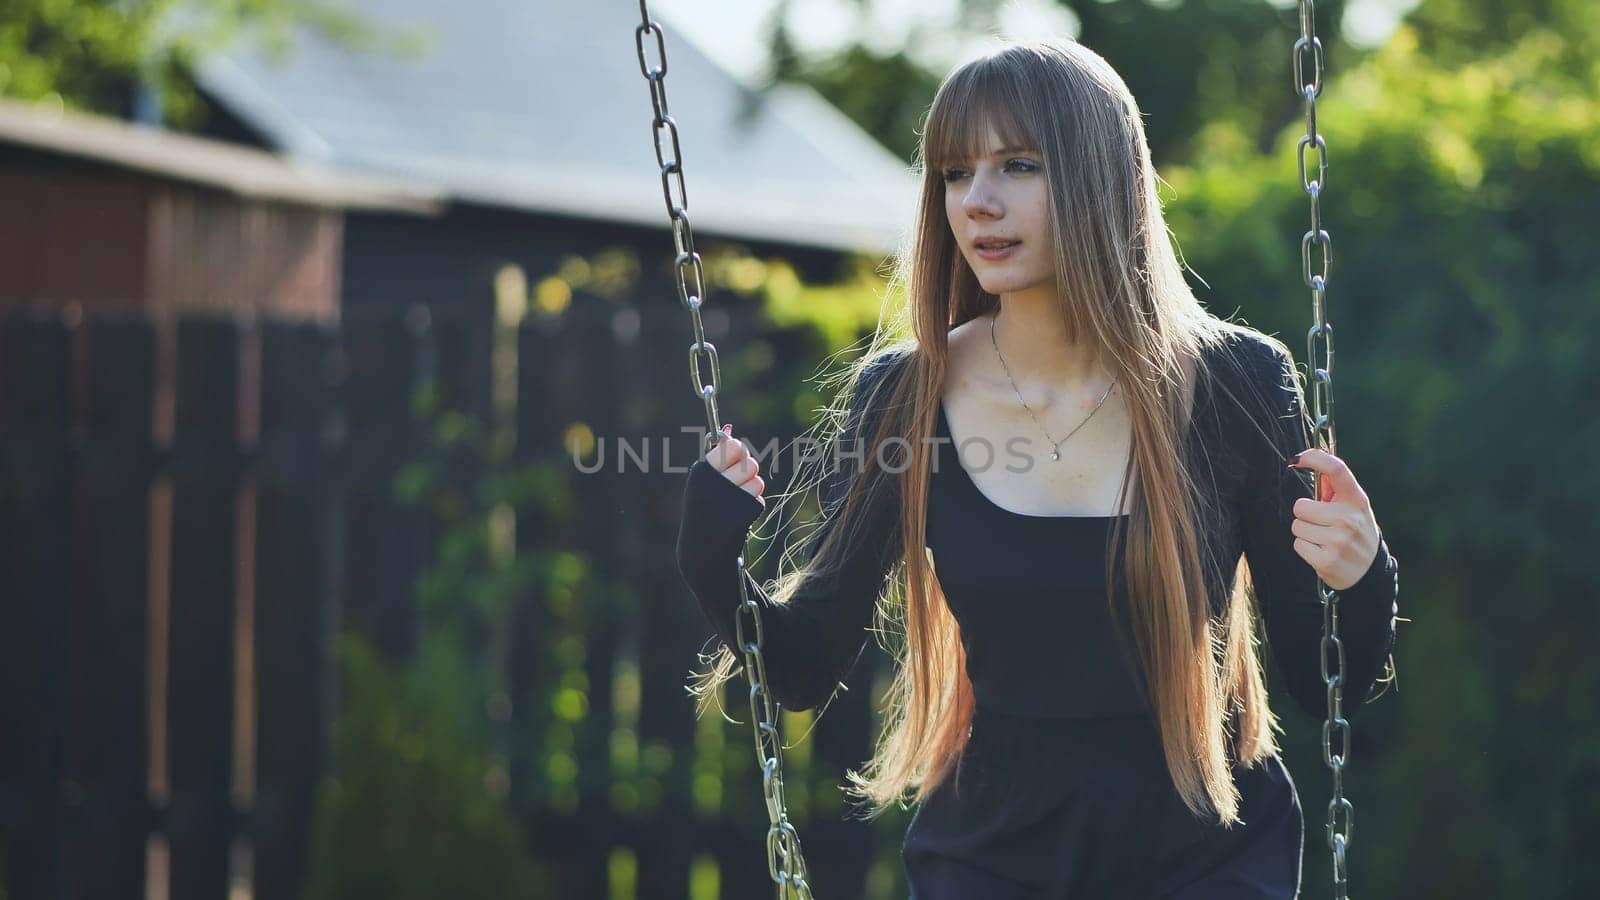 A blonde-haired girl in a black dress rides on a swing. by DovidPro